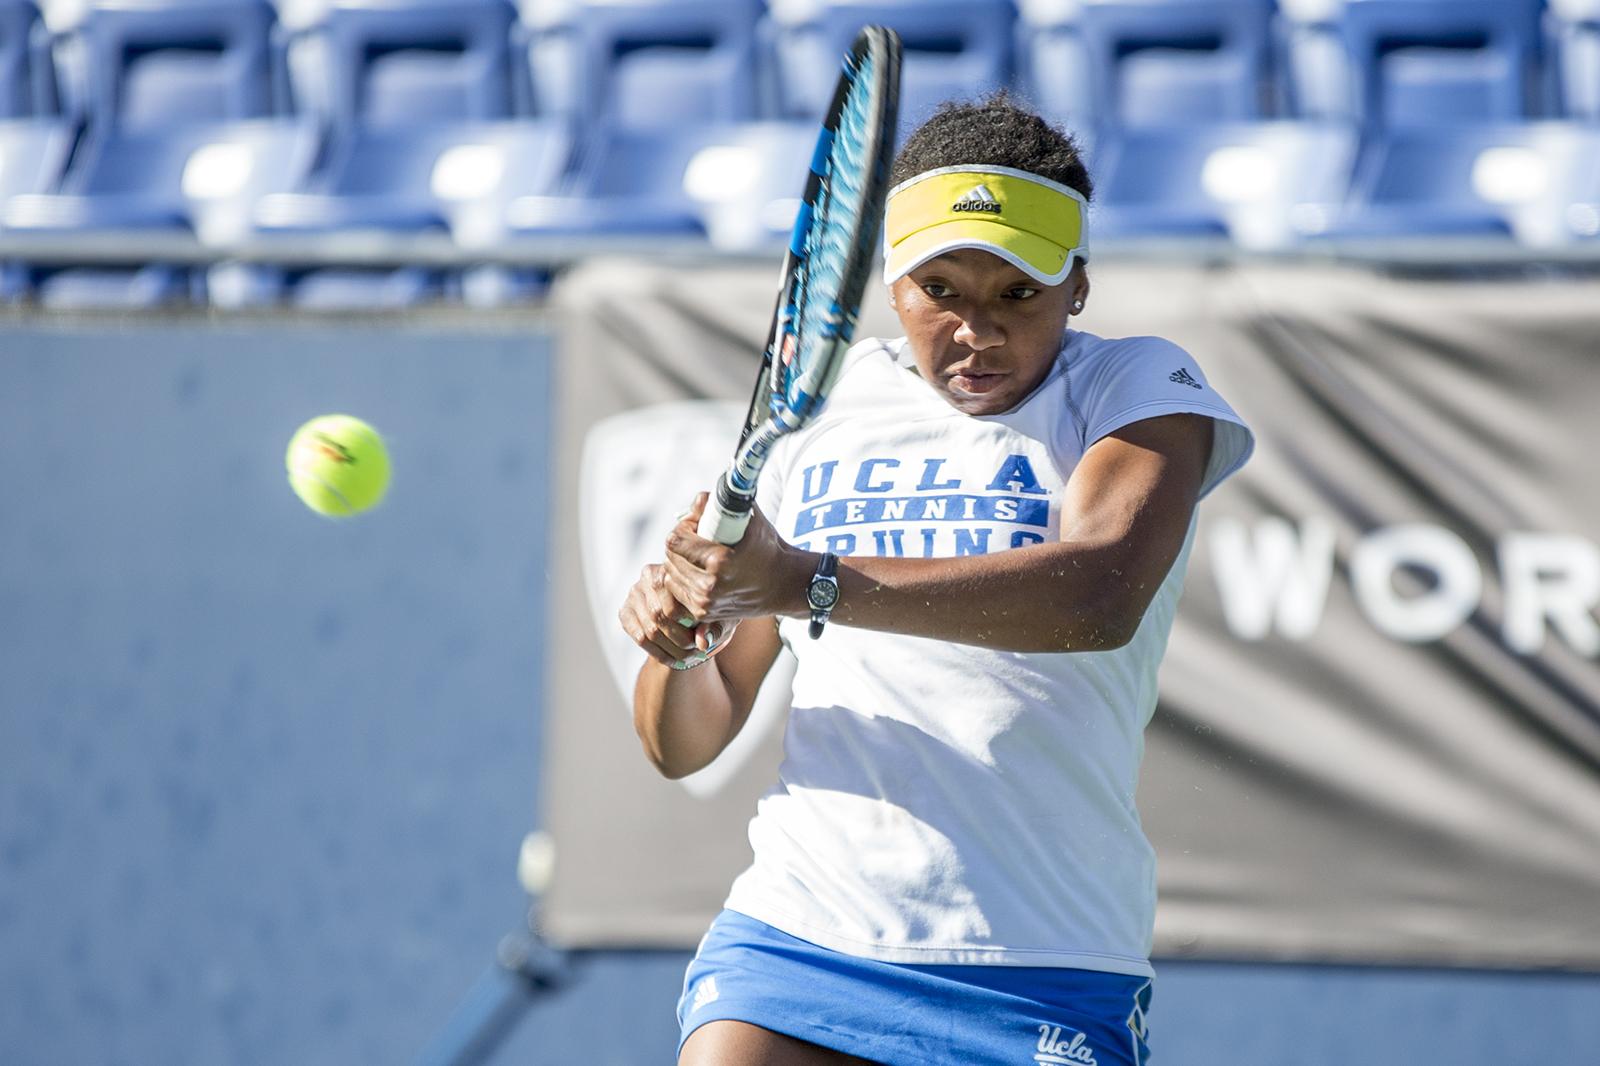 UCLA tennis sweeps American Collegiate Invitational at US Open Daily